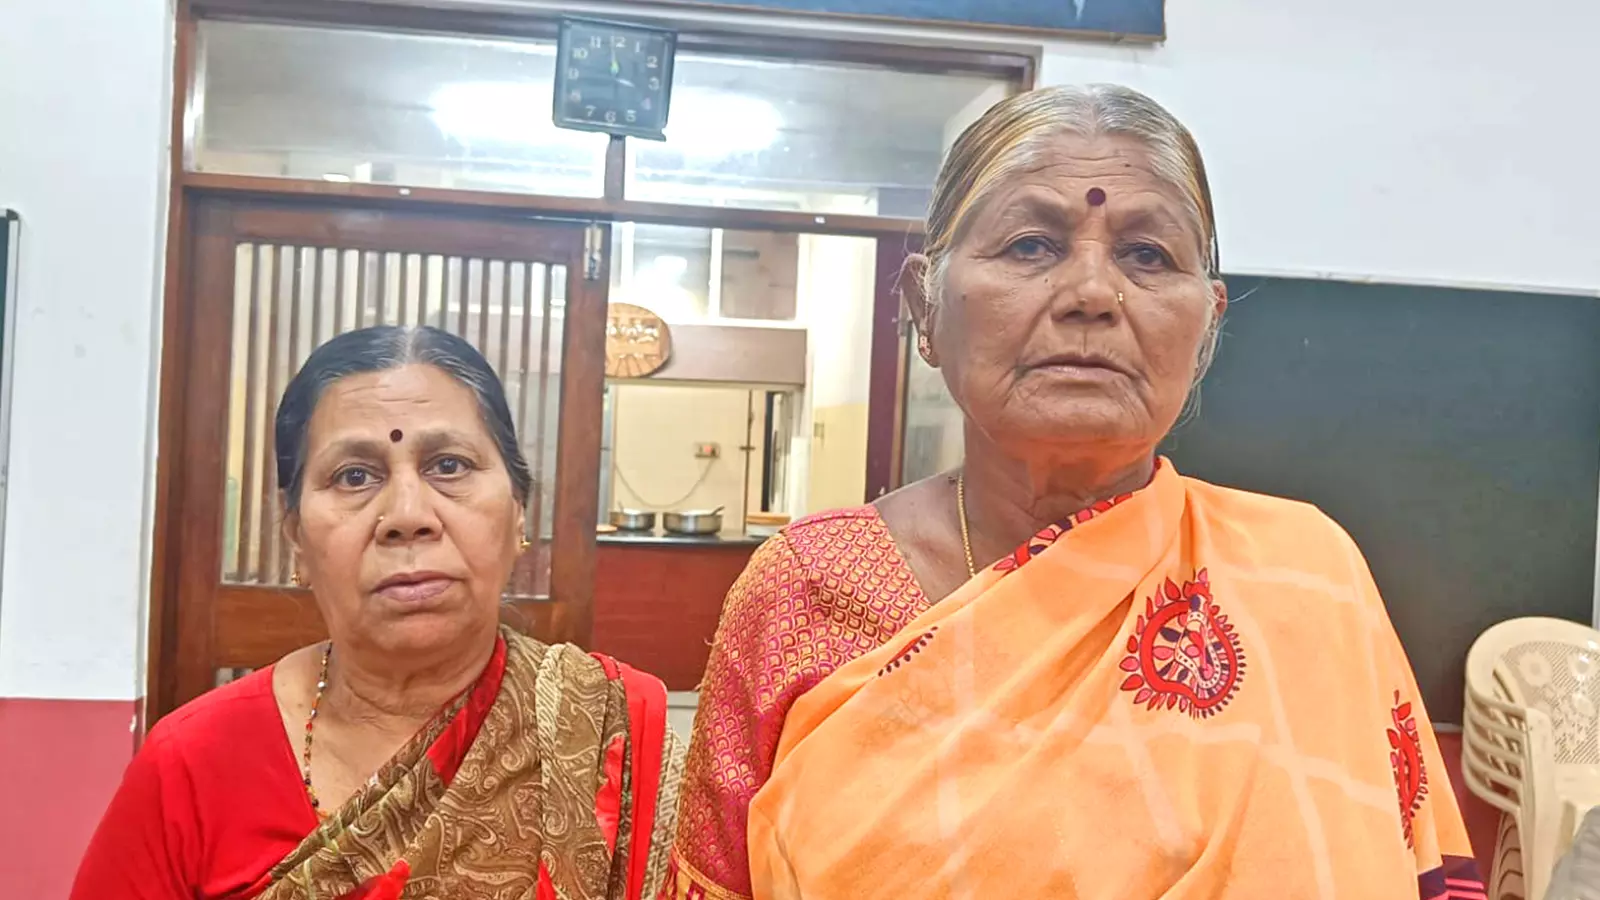 Gowramma (right) and Manju (left) say old age does not allow them to work.